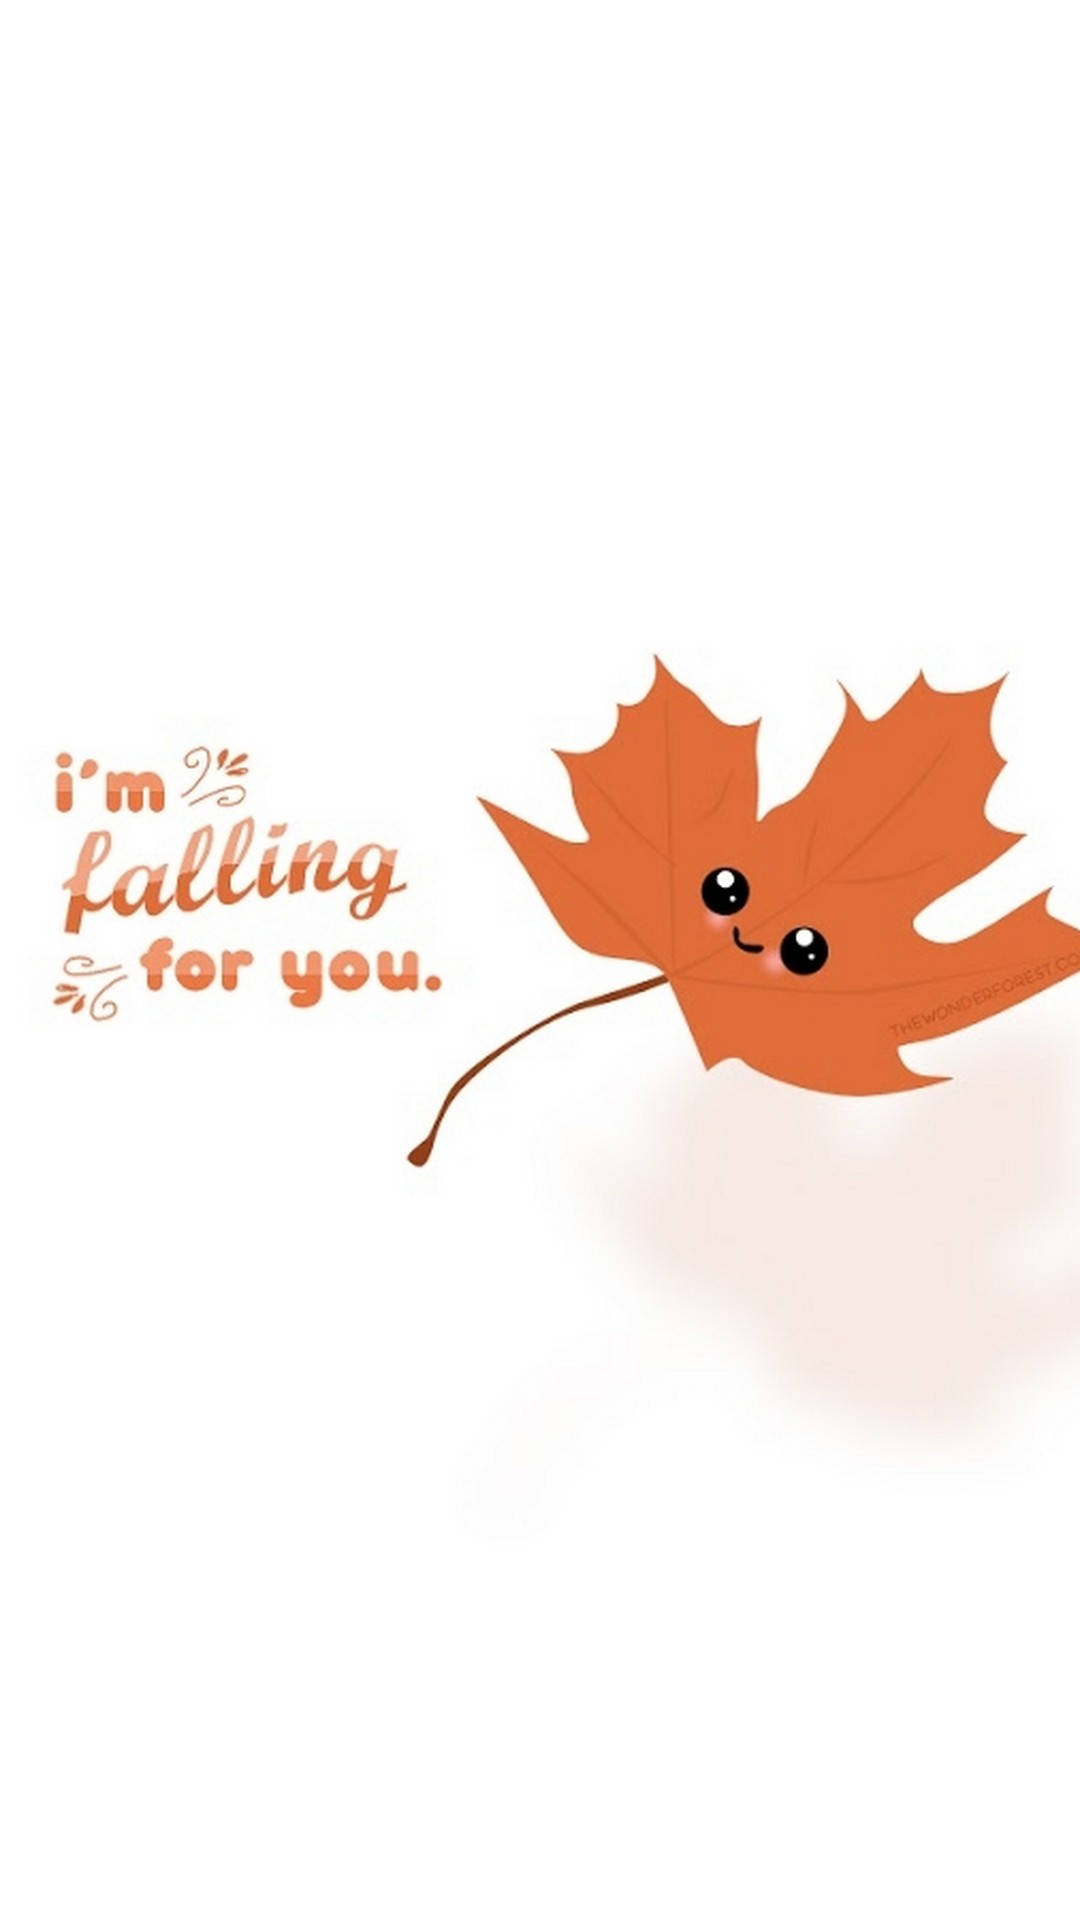 Stay Cozy at Home with this Cute Fall Phone! Wallpaper